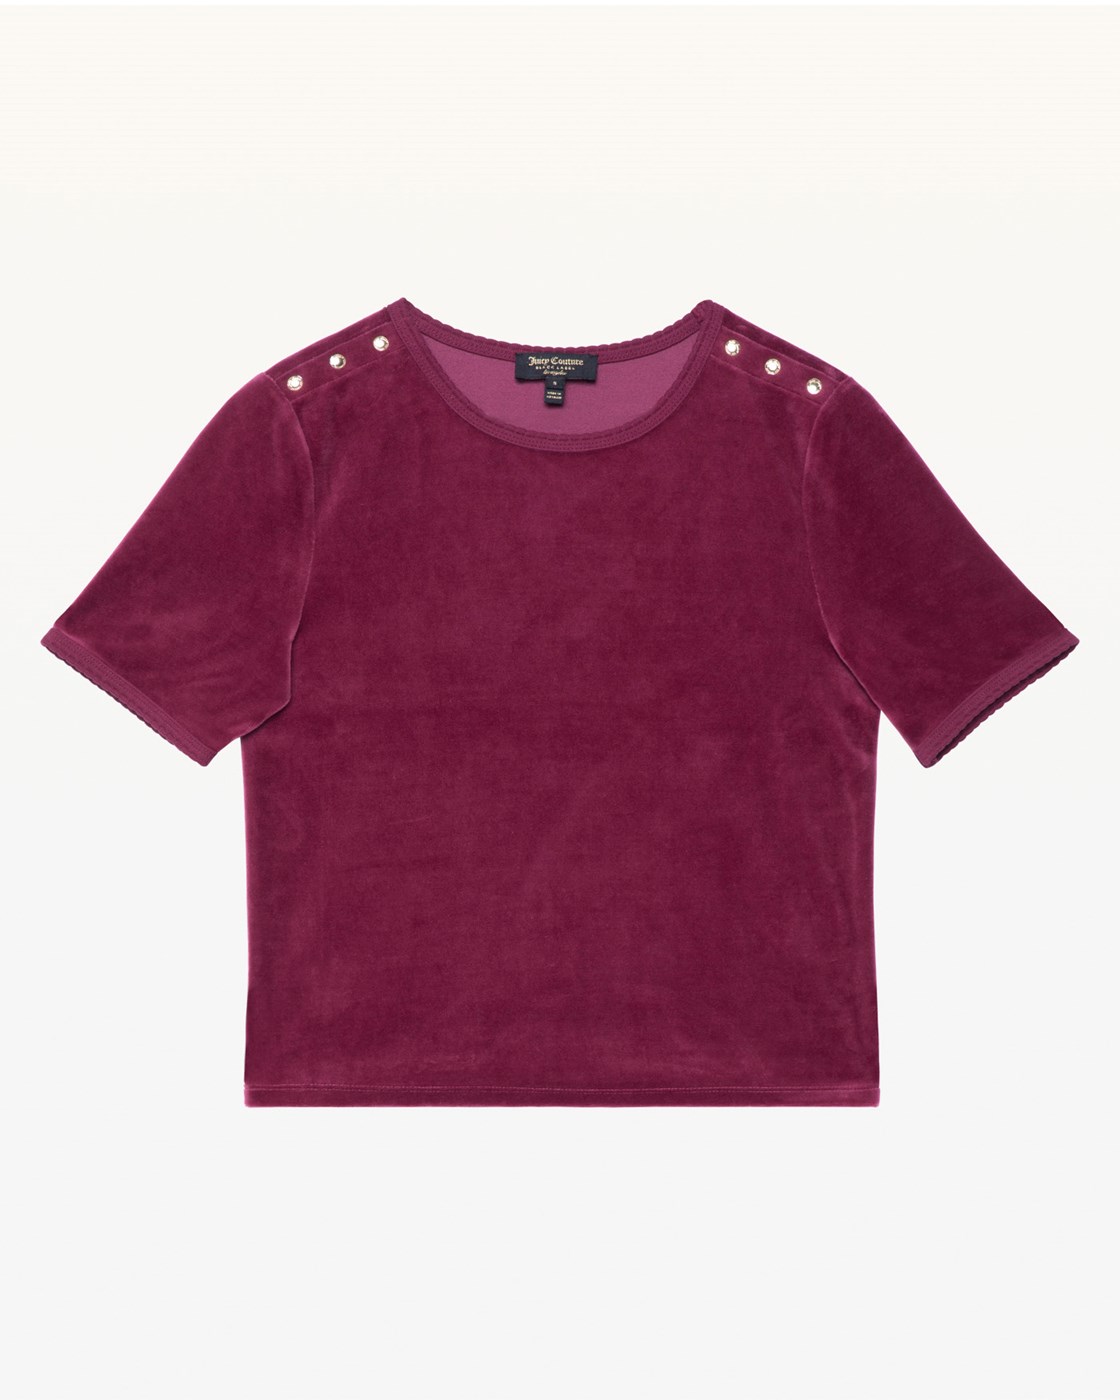 Juicy Couture Velour Top